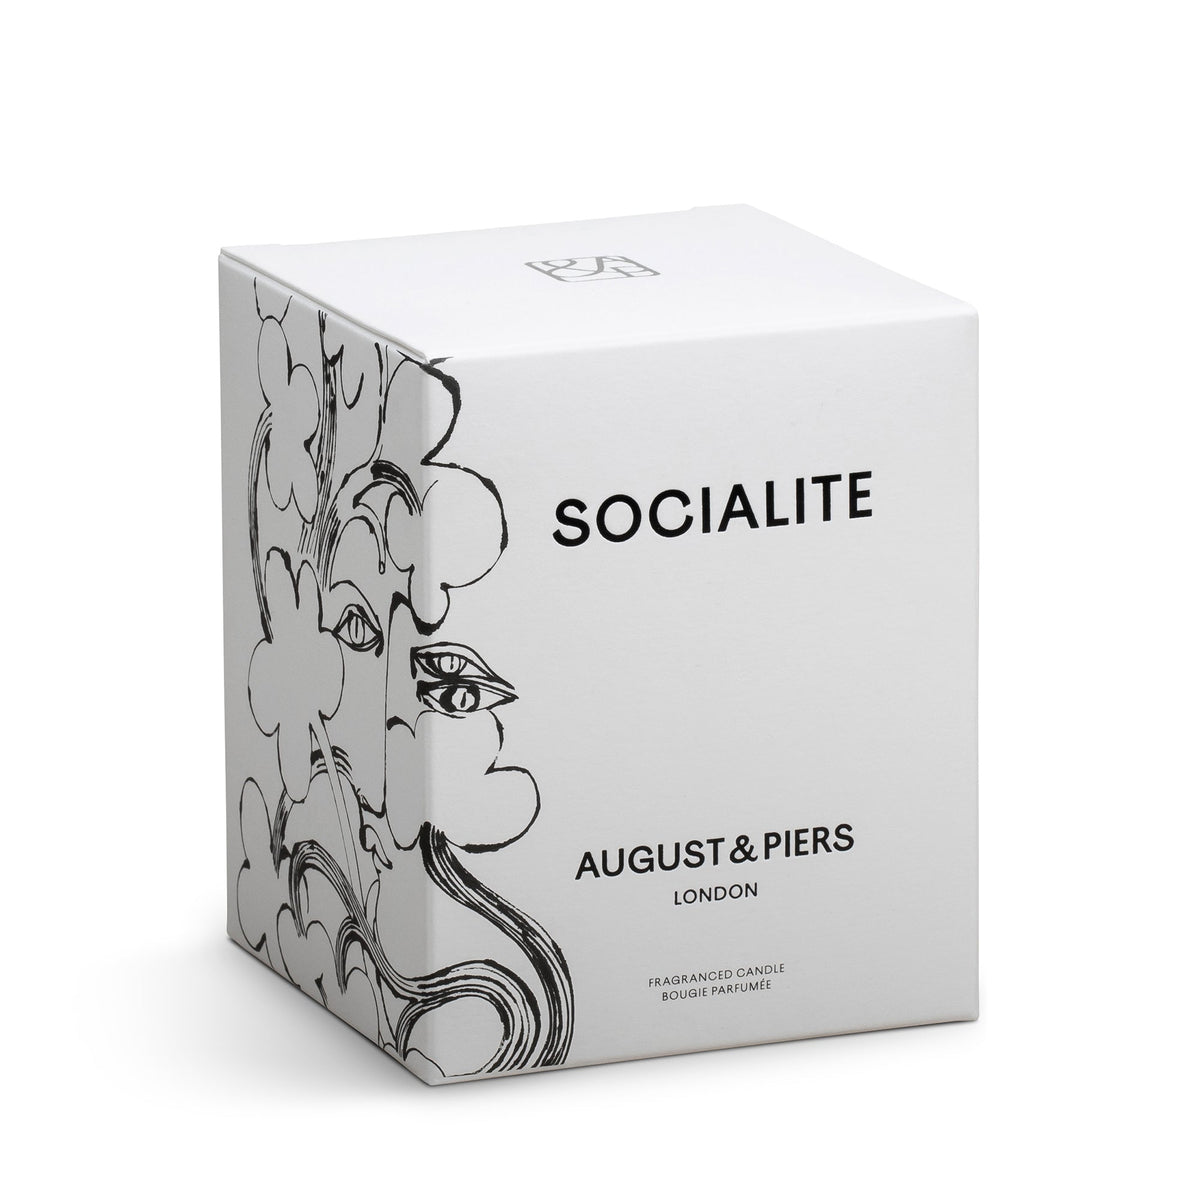 August & Piers Socialite Scented Candle